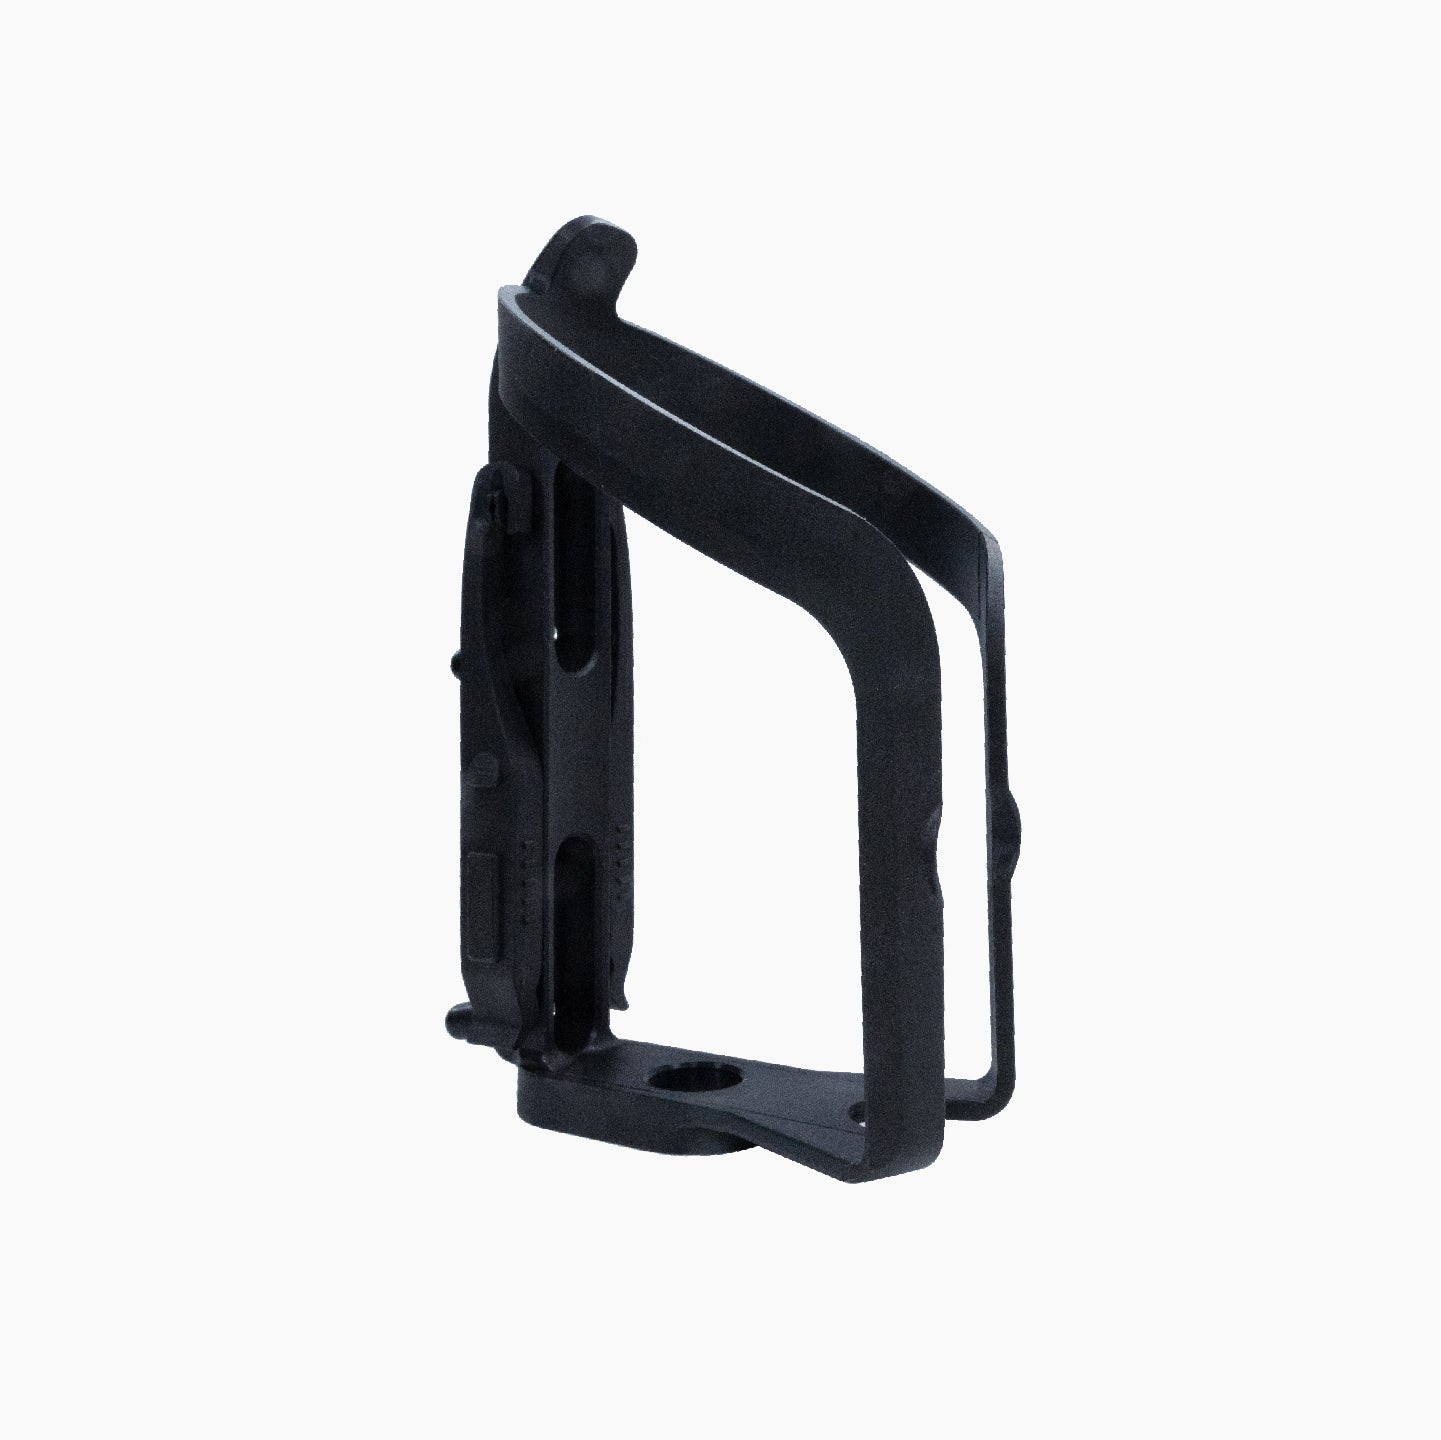 » Waterbottle cage (100% off)